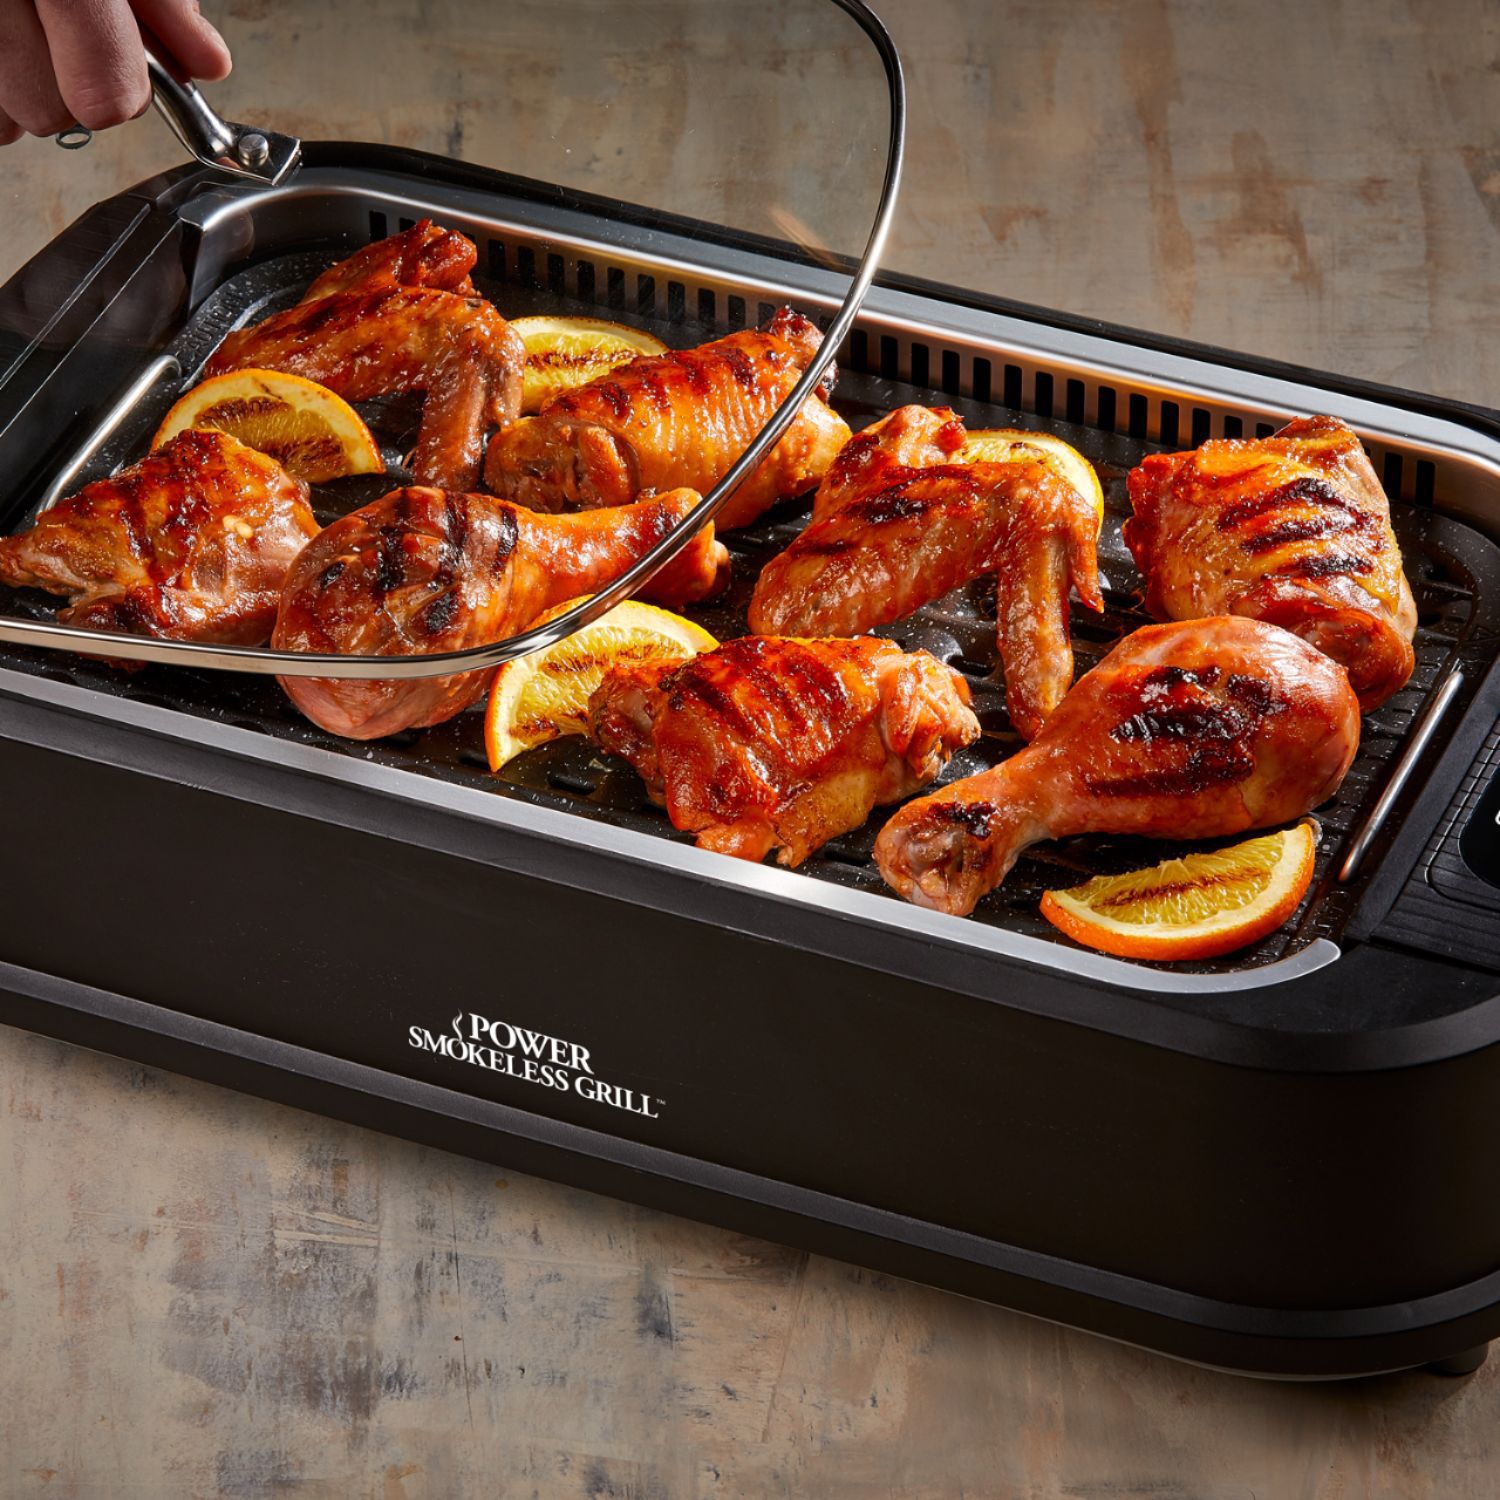  Indoor Smokeless Electric Grill